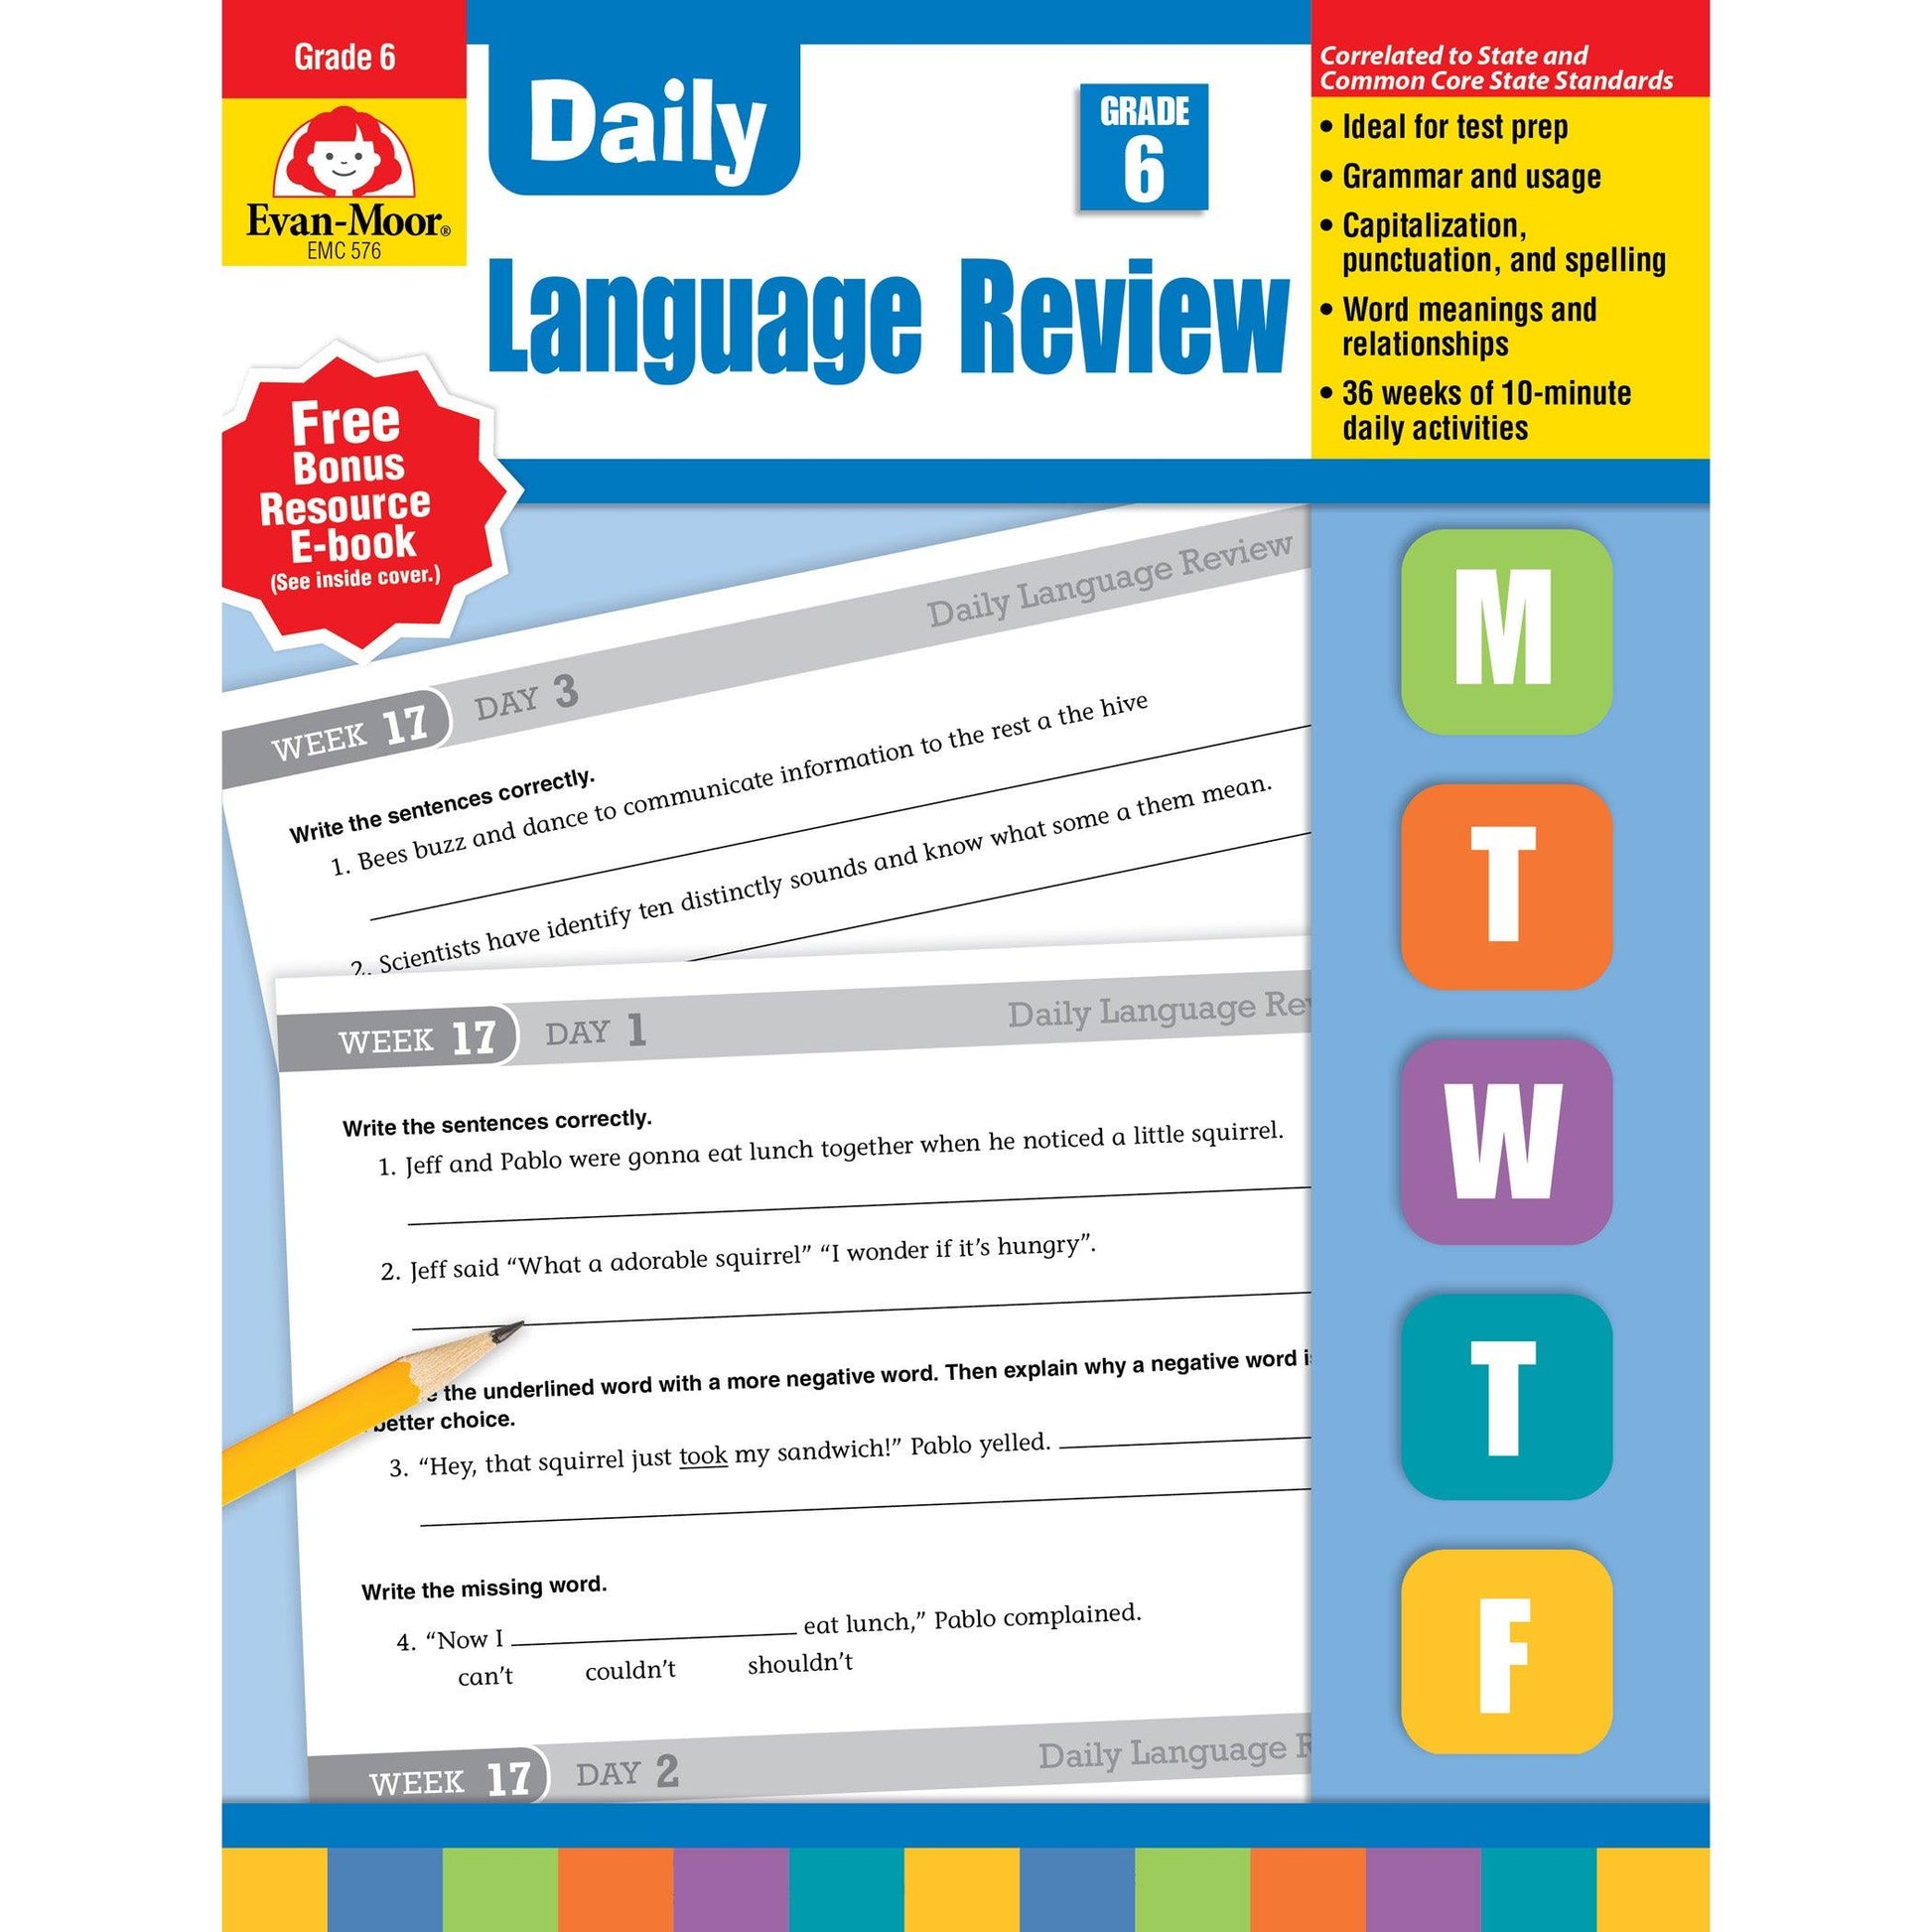 Daily Language Review Teacher's Edition, Grade 6 - Loomini